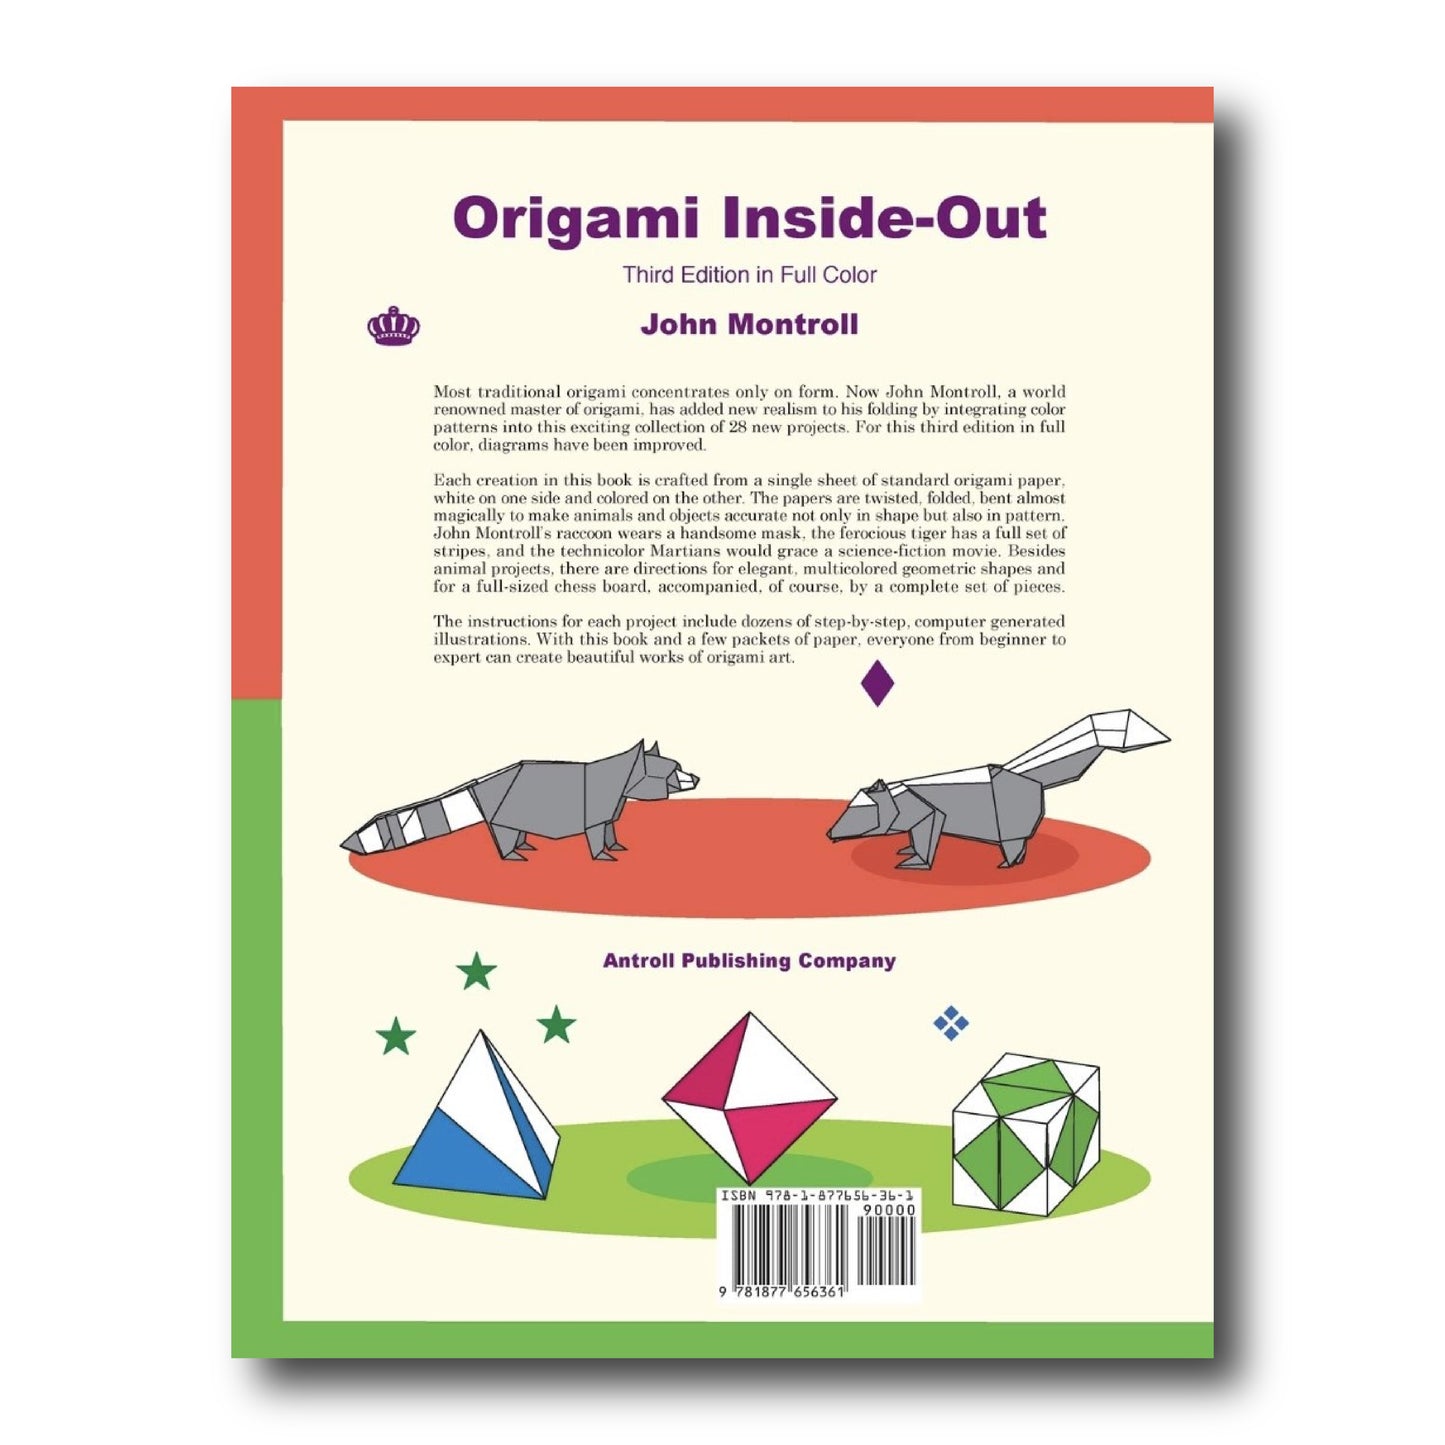 Origami Inside-Out (Third Edition in Full Color)